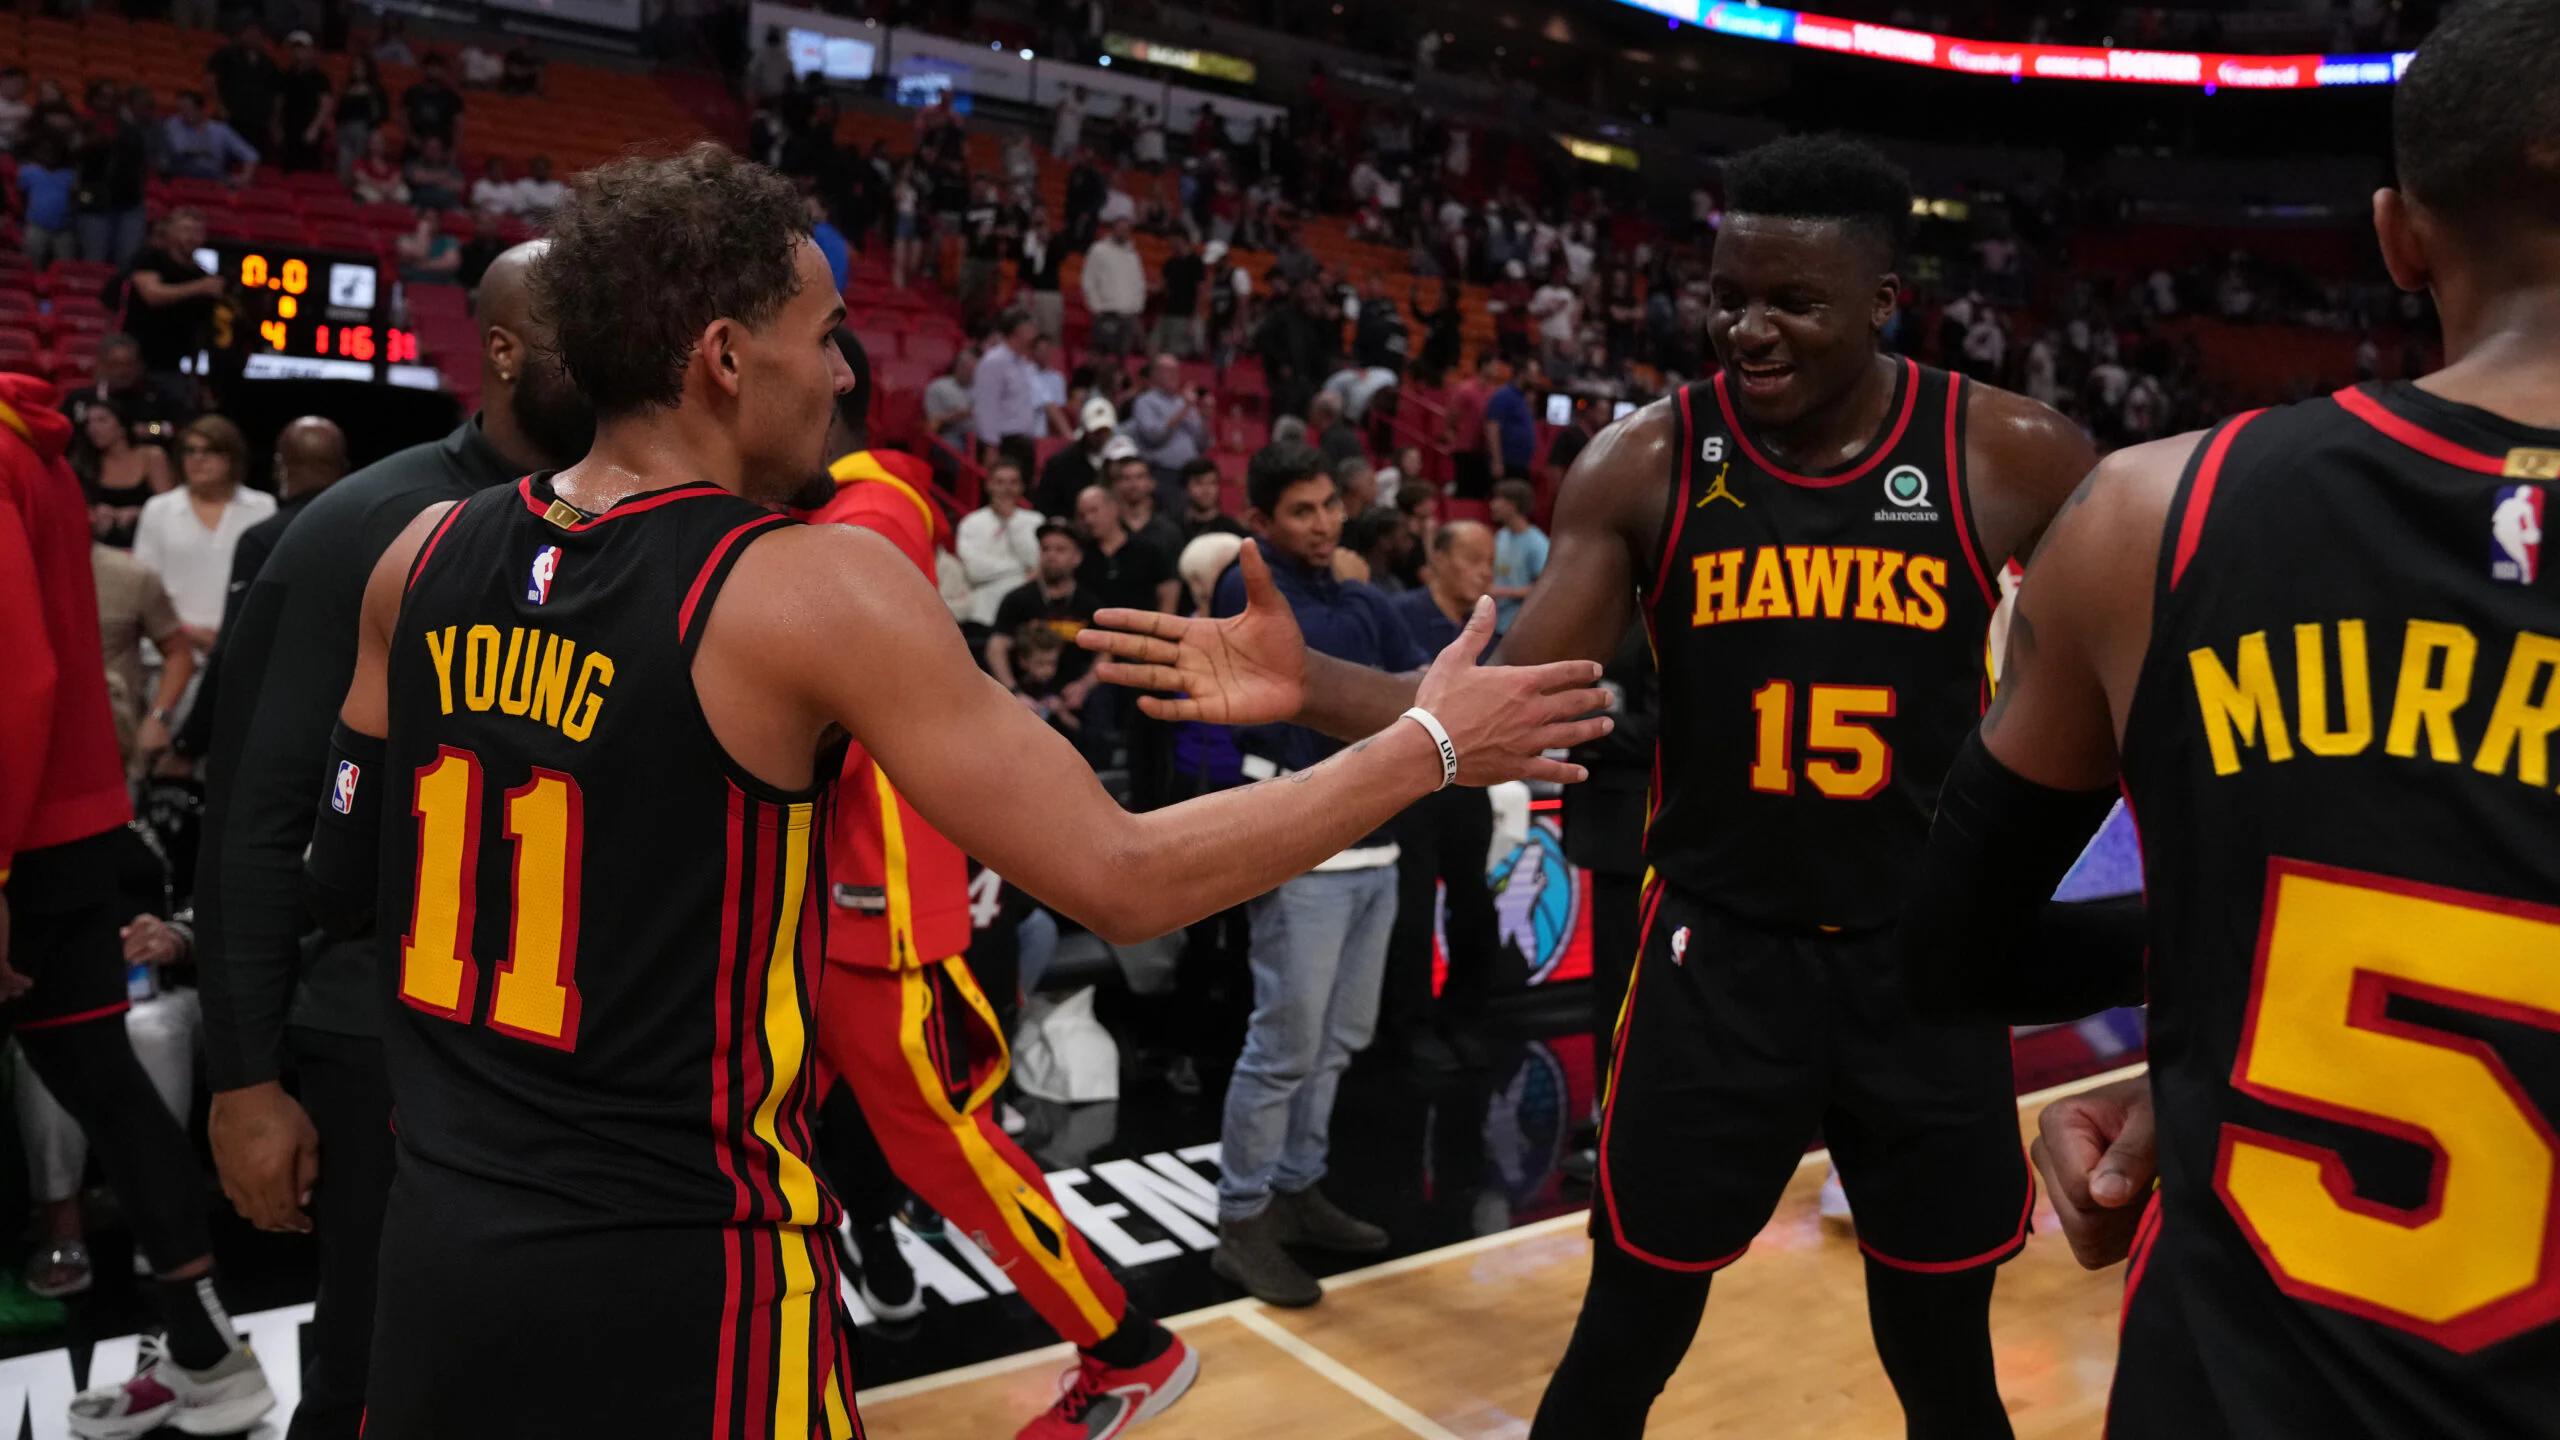 The Atlanta Hawks beat the Miami Heat to stay alive in the NBA Playoffs